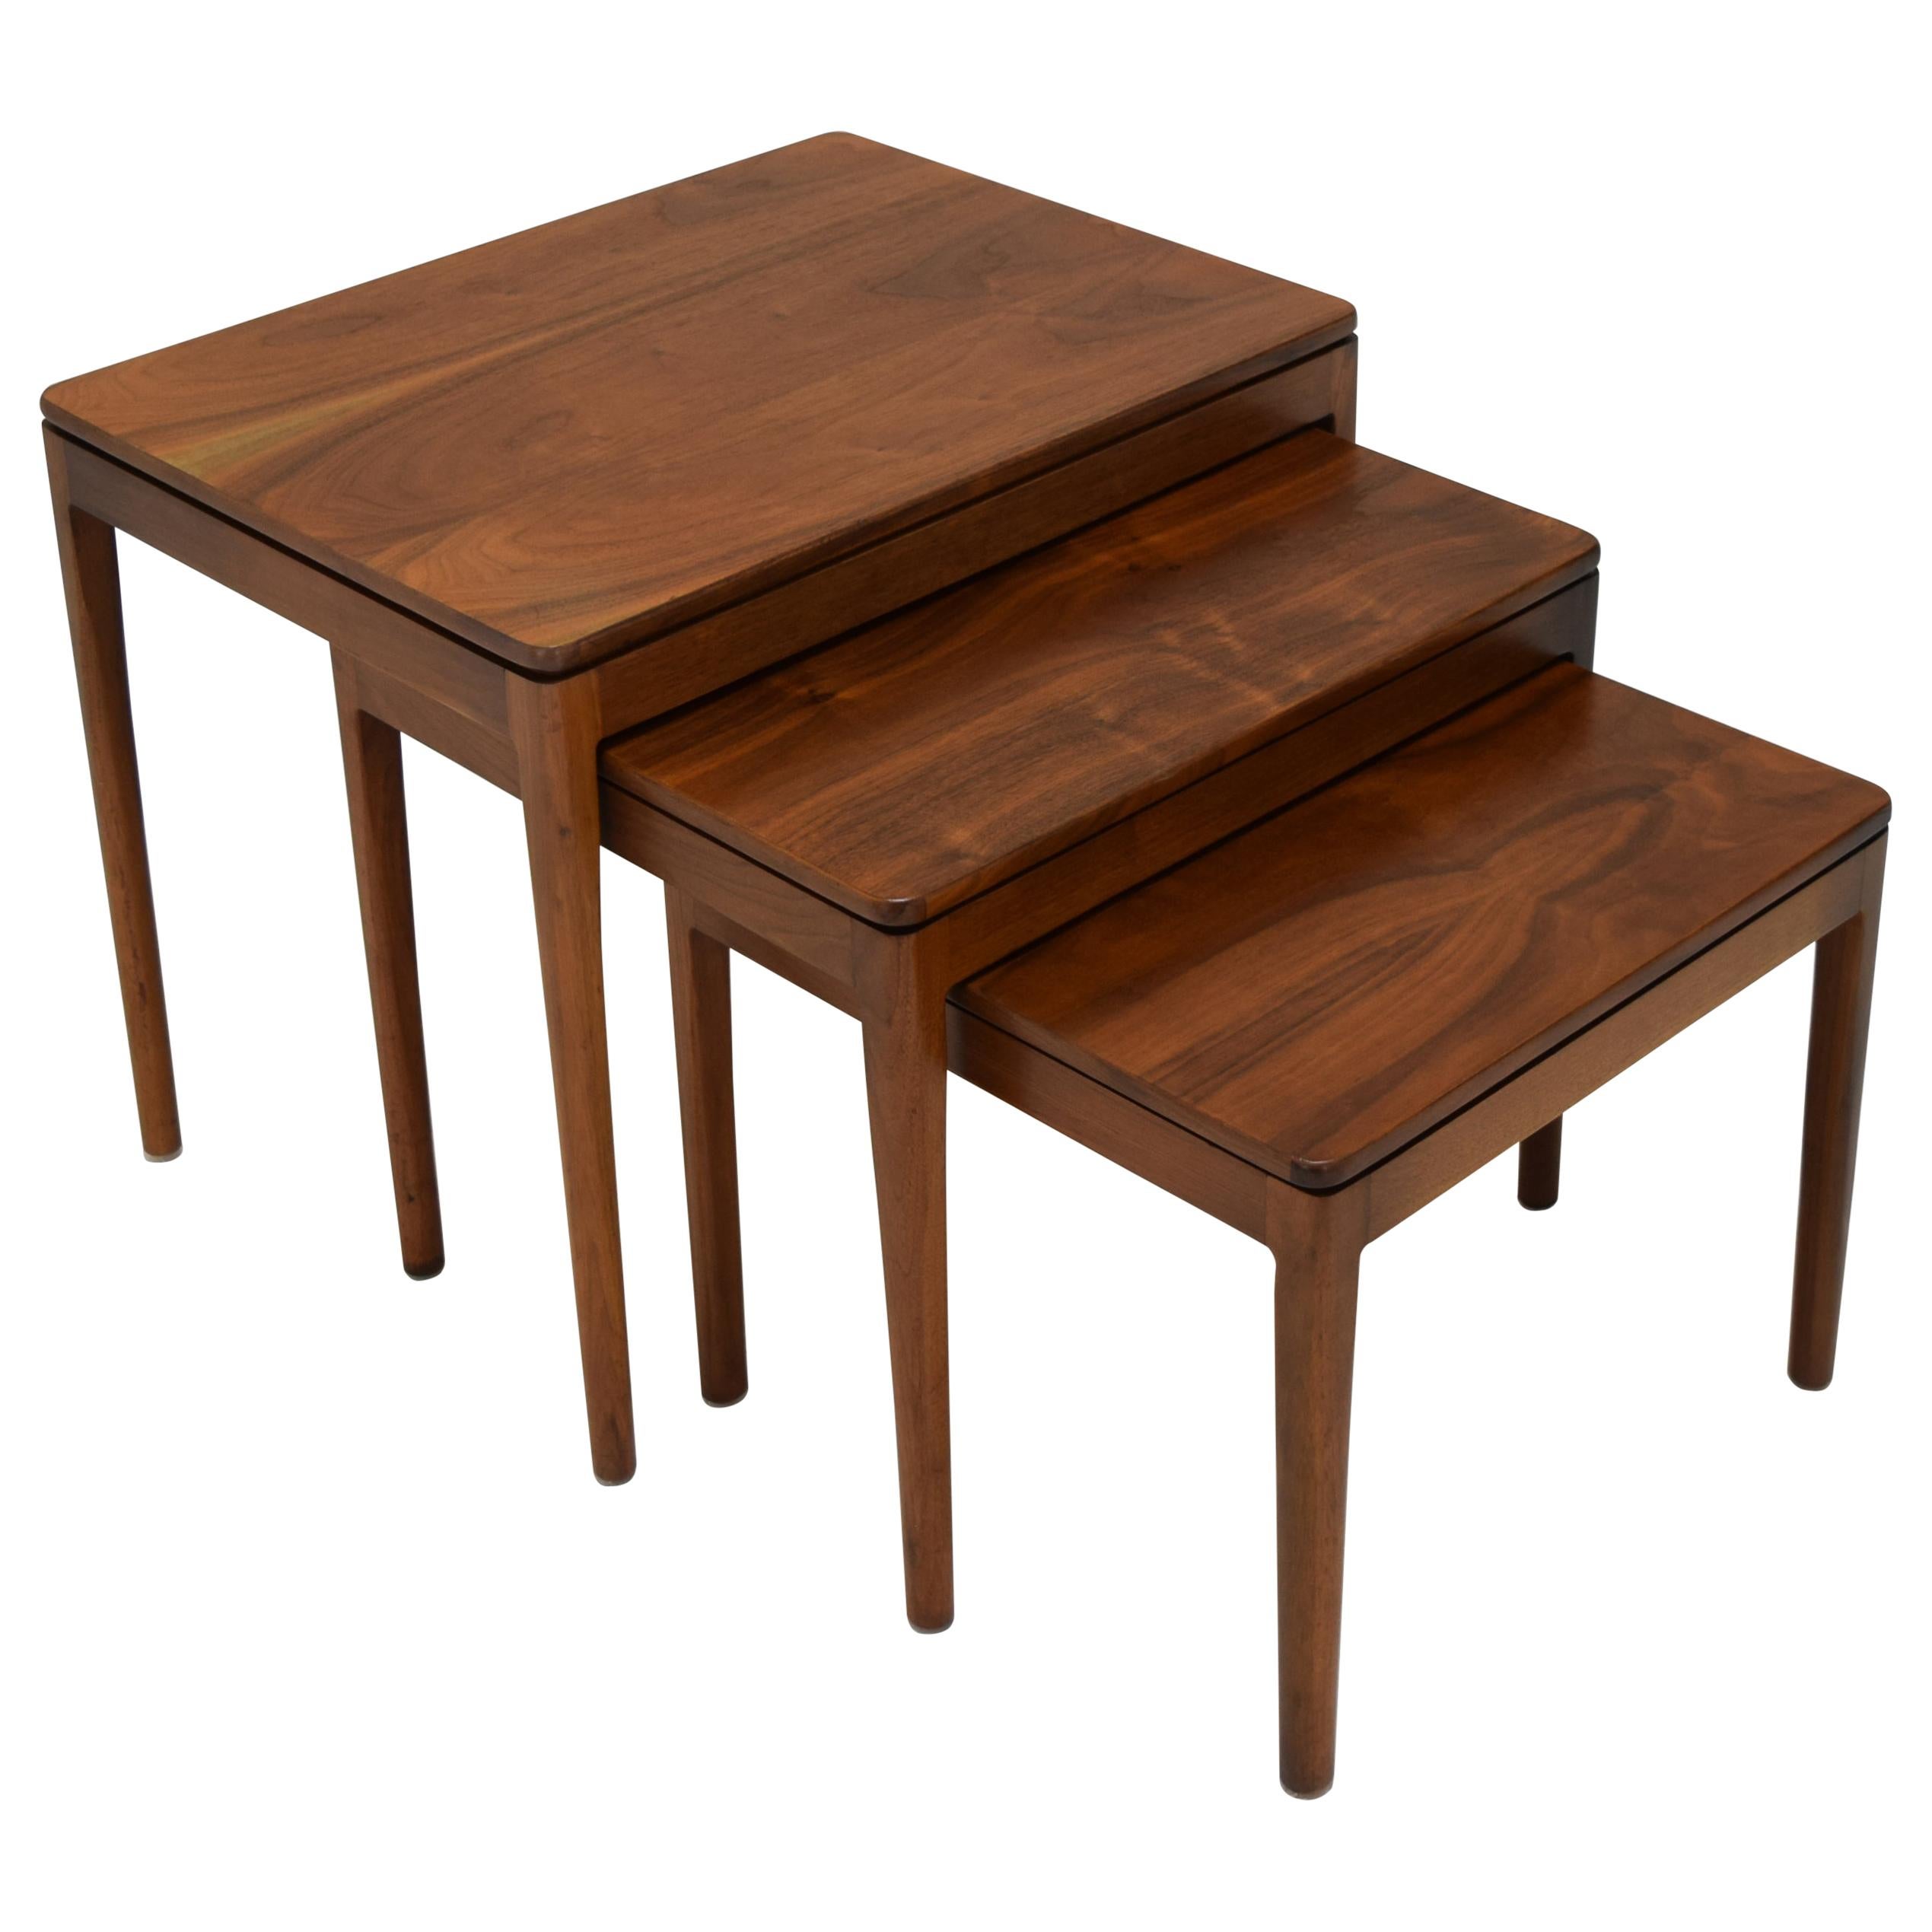 Refinished Set of 3 Nesting Tables in Walnut by Drexel